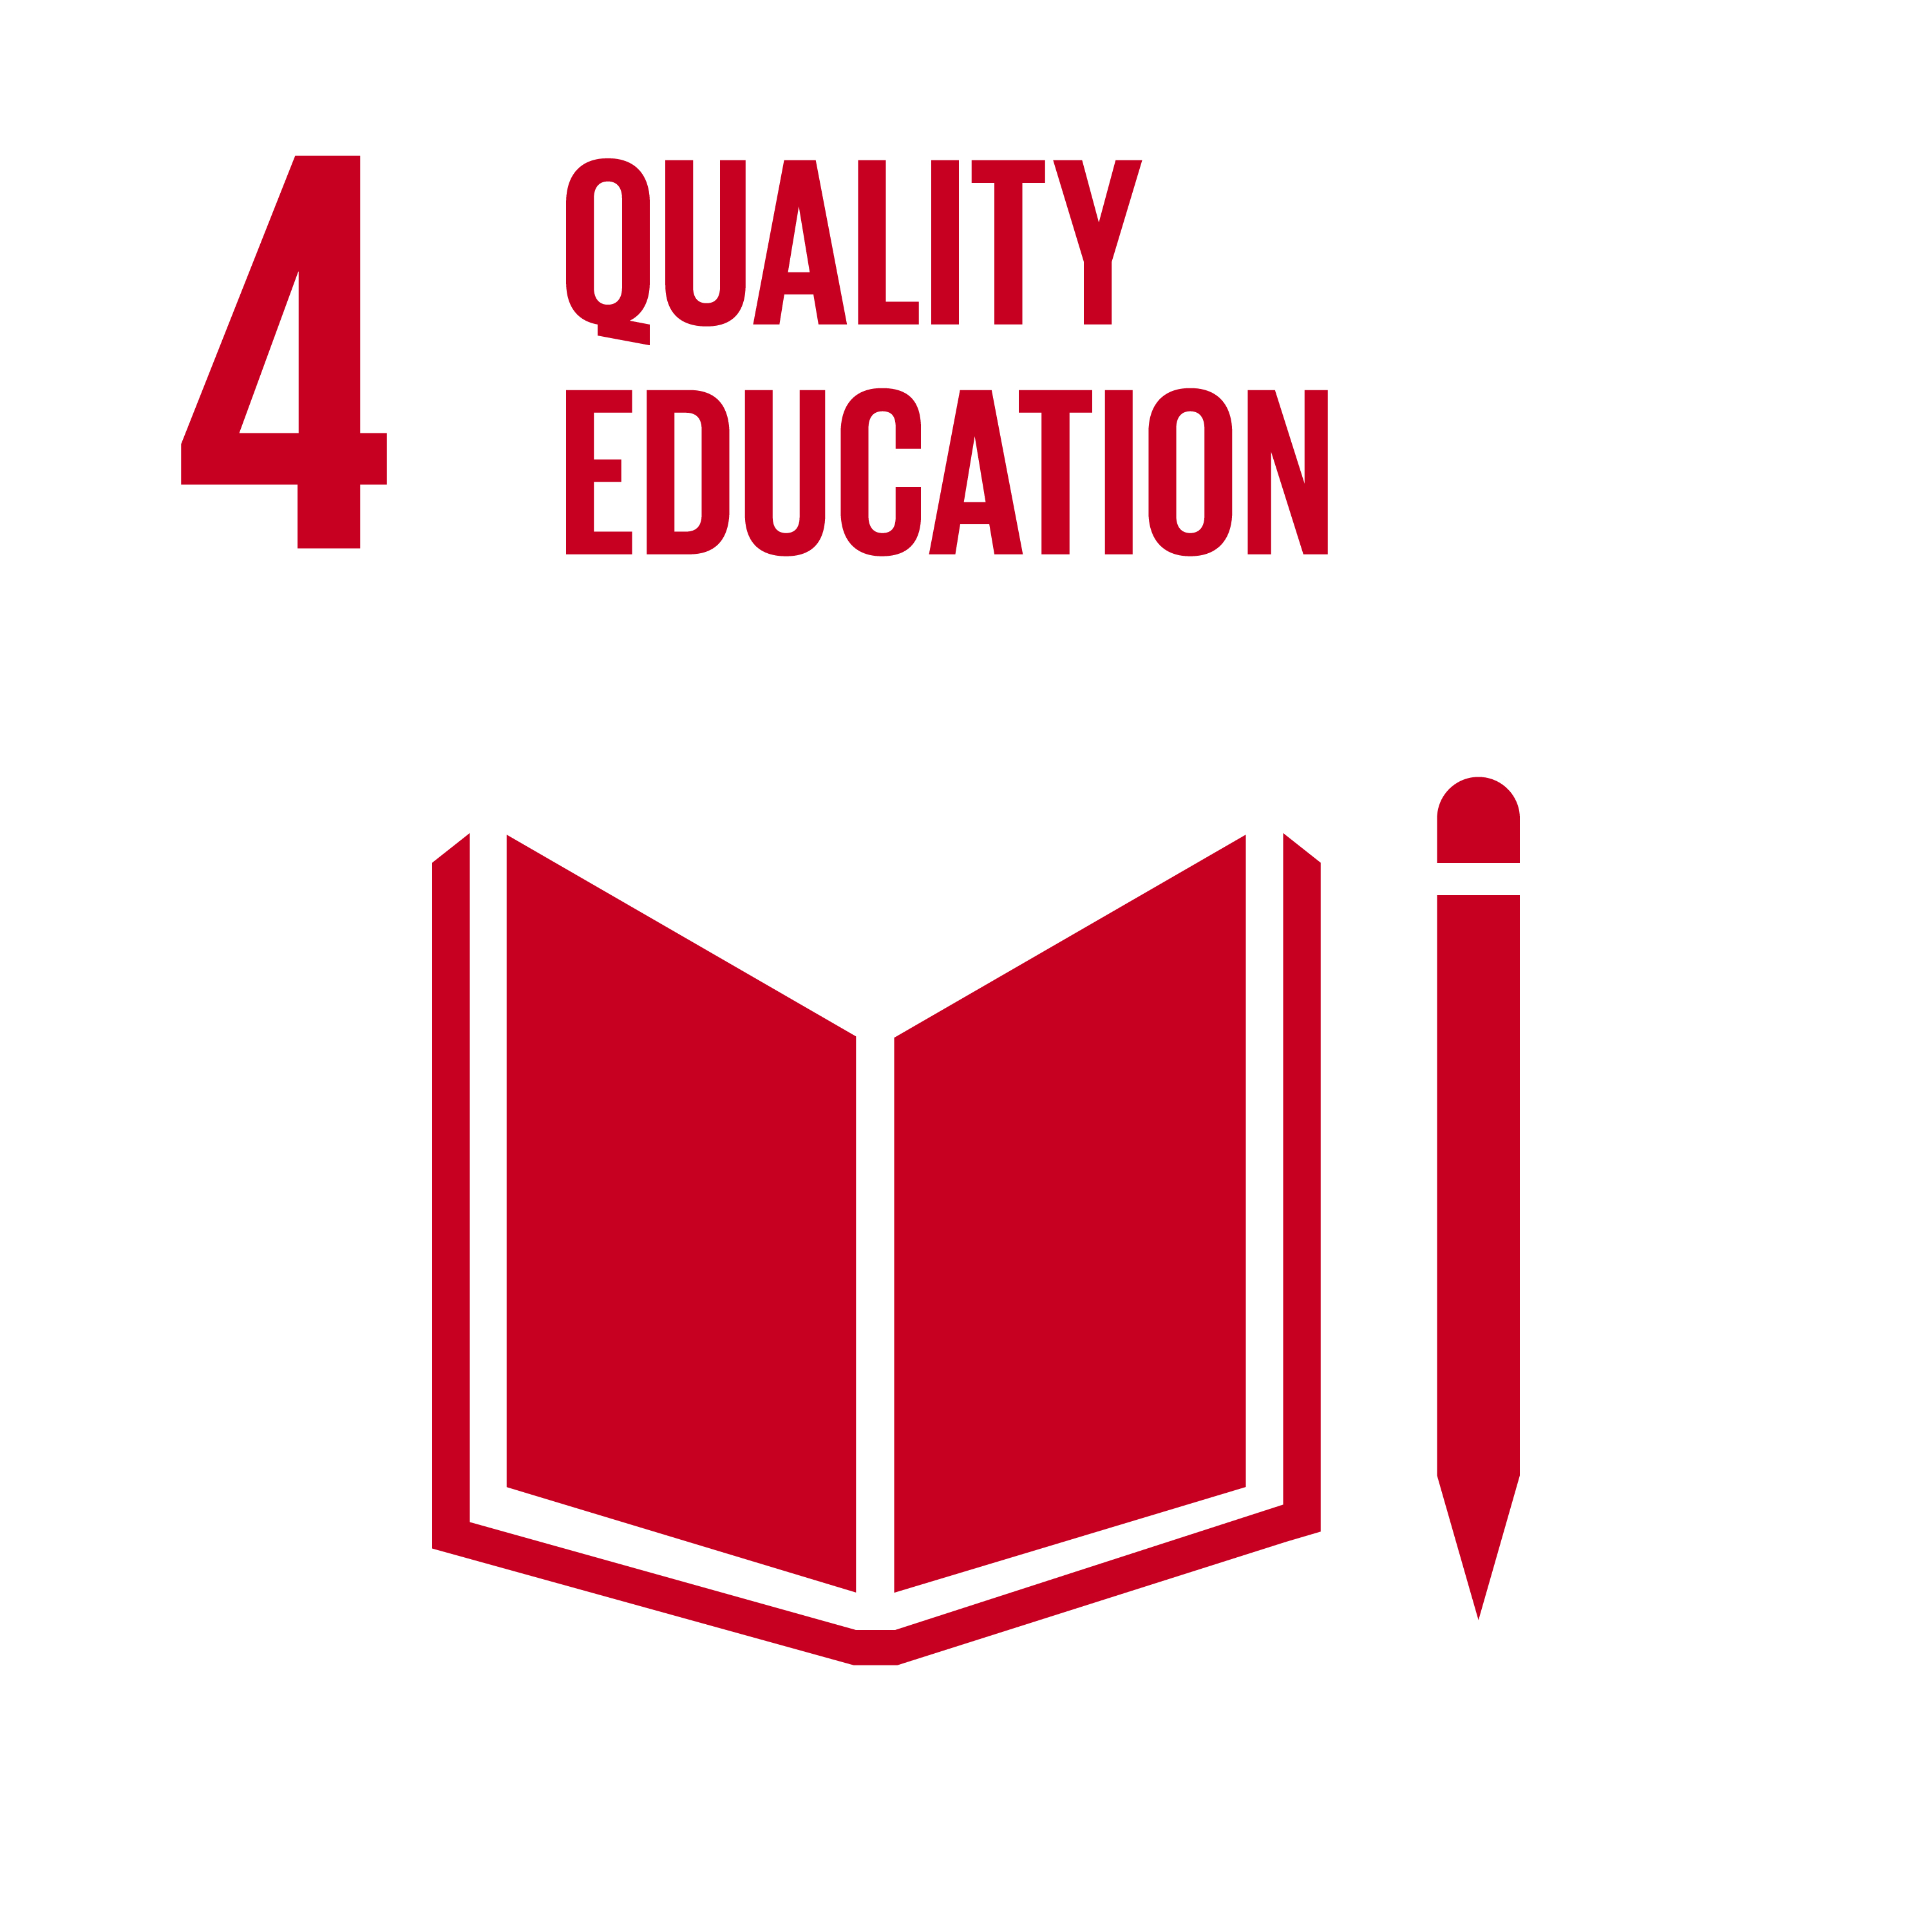 Sustainable development goals: Number 4 - Quality education